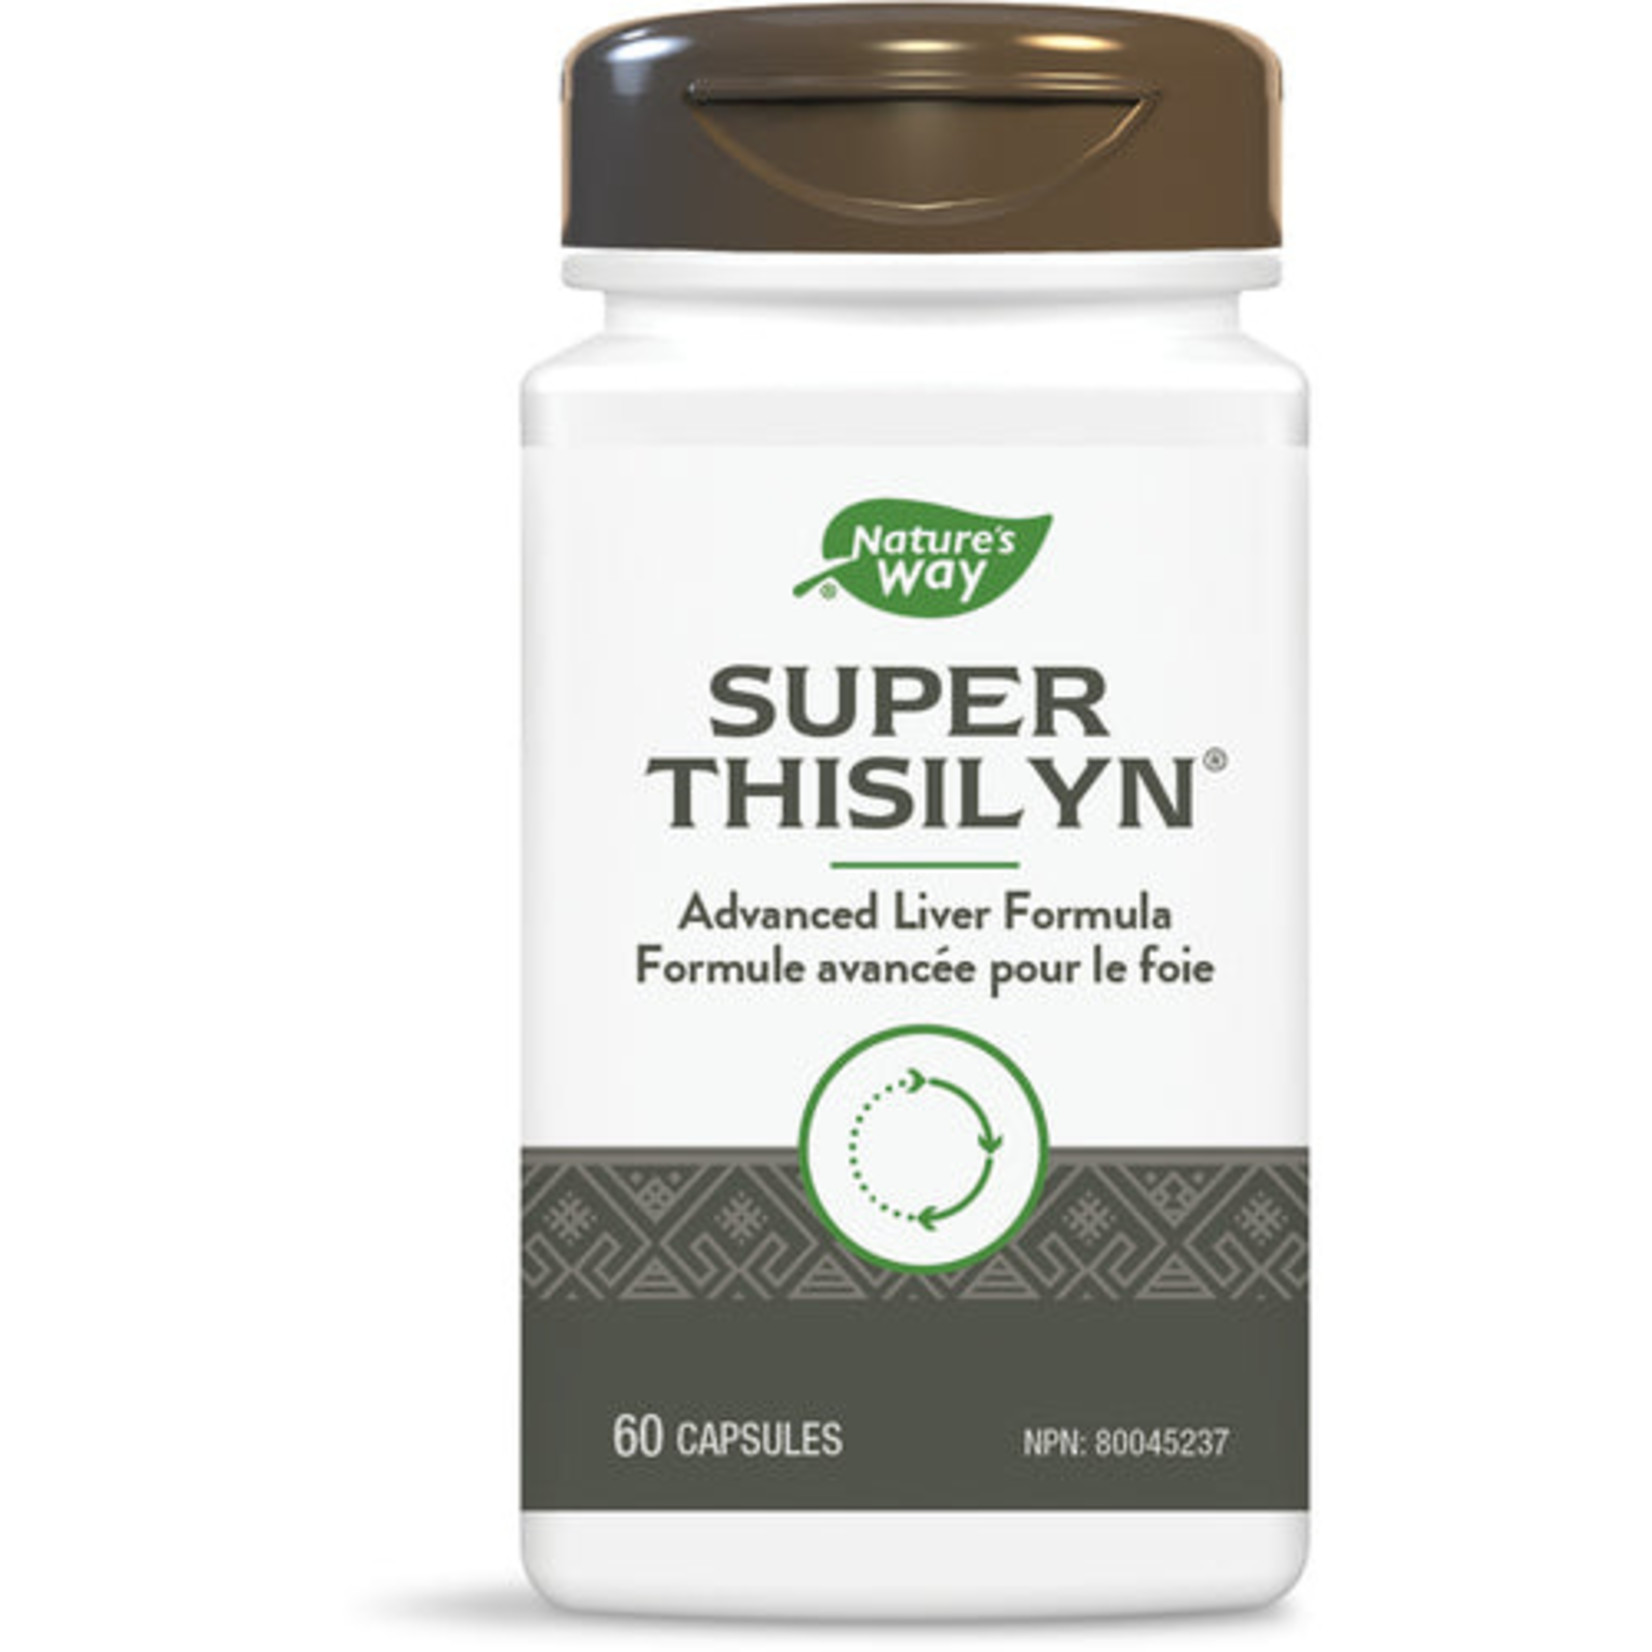 NATURES WAY NATURE'S WAY SUPER THISILYN LIVER / GB SUPPORT 60 VEGICAPS